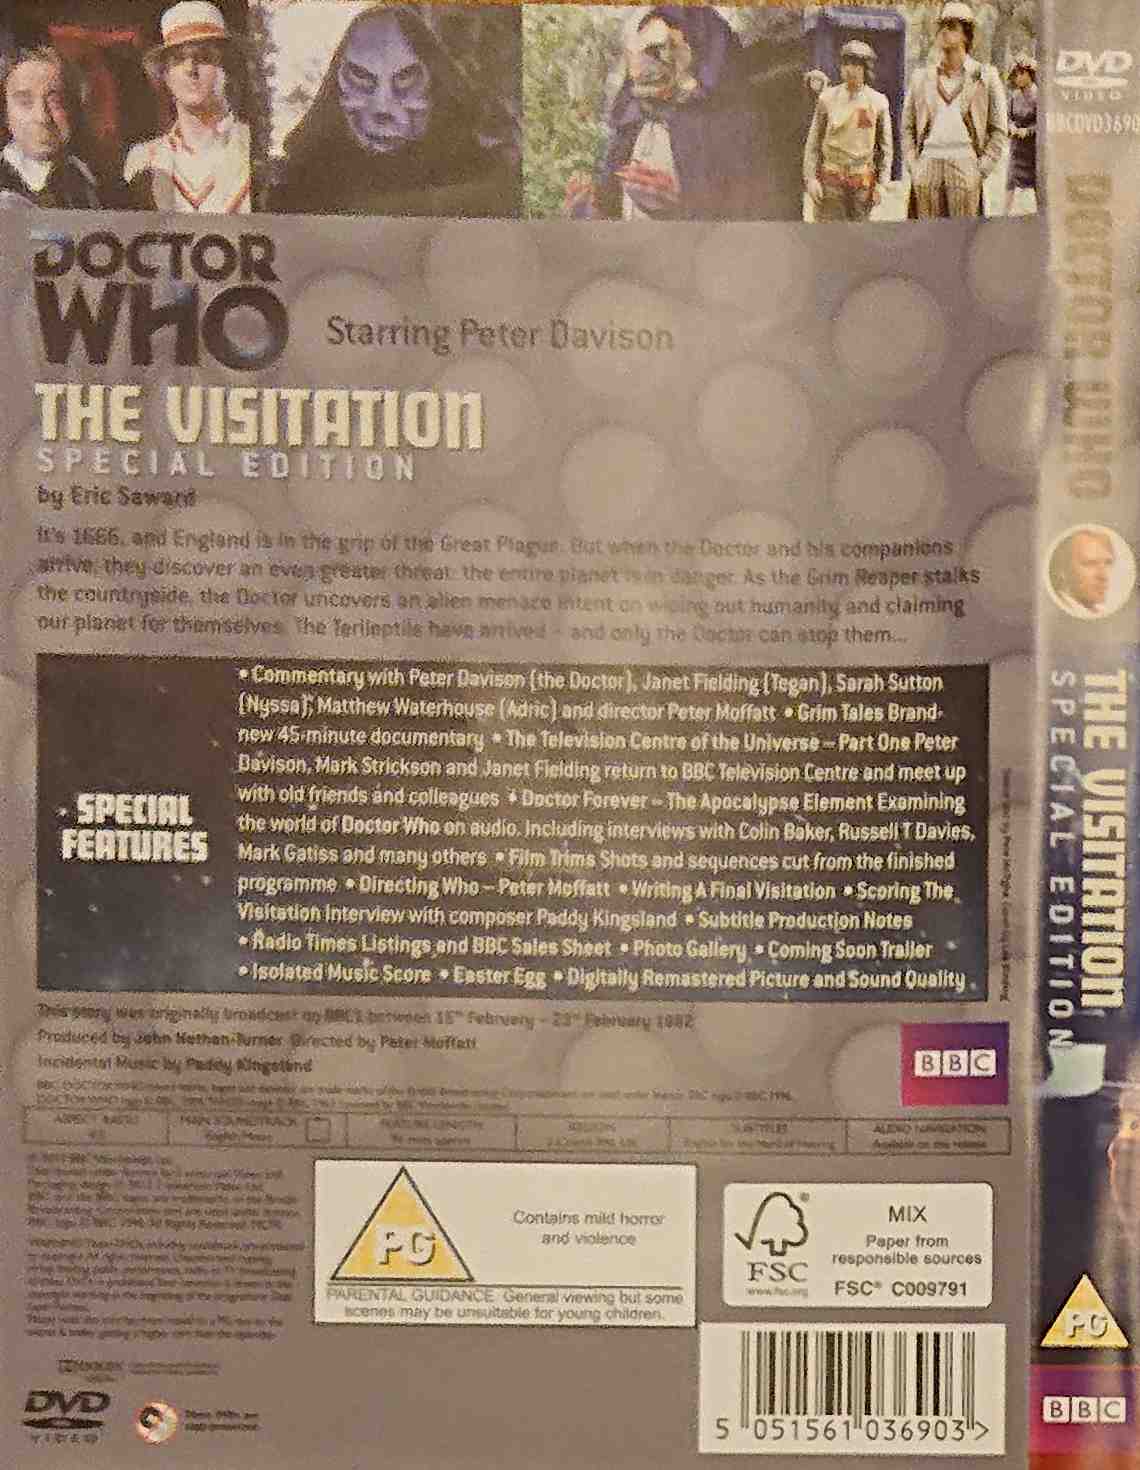 Picture of BBCDVD 3690 Doctor Who - The visitation by artist Eric Saward from the BBC records and Tapes library